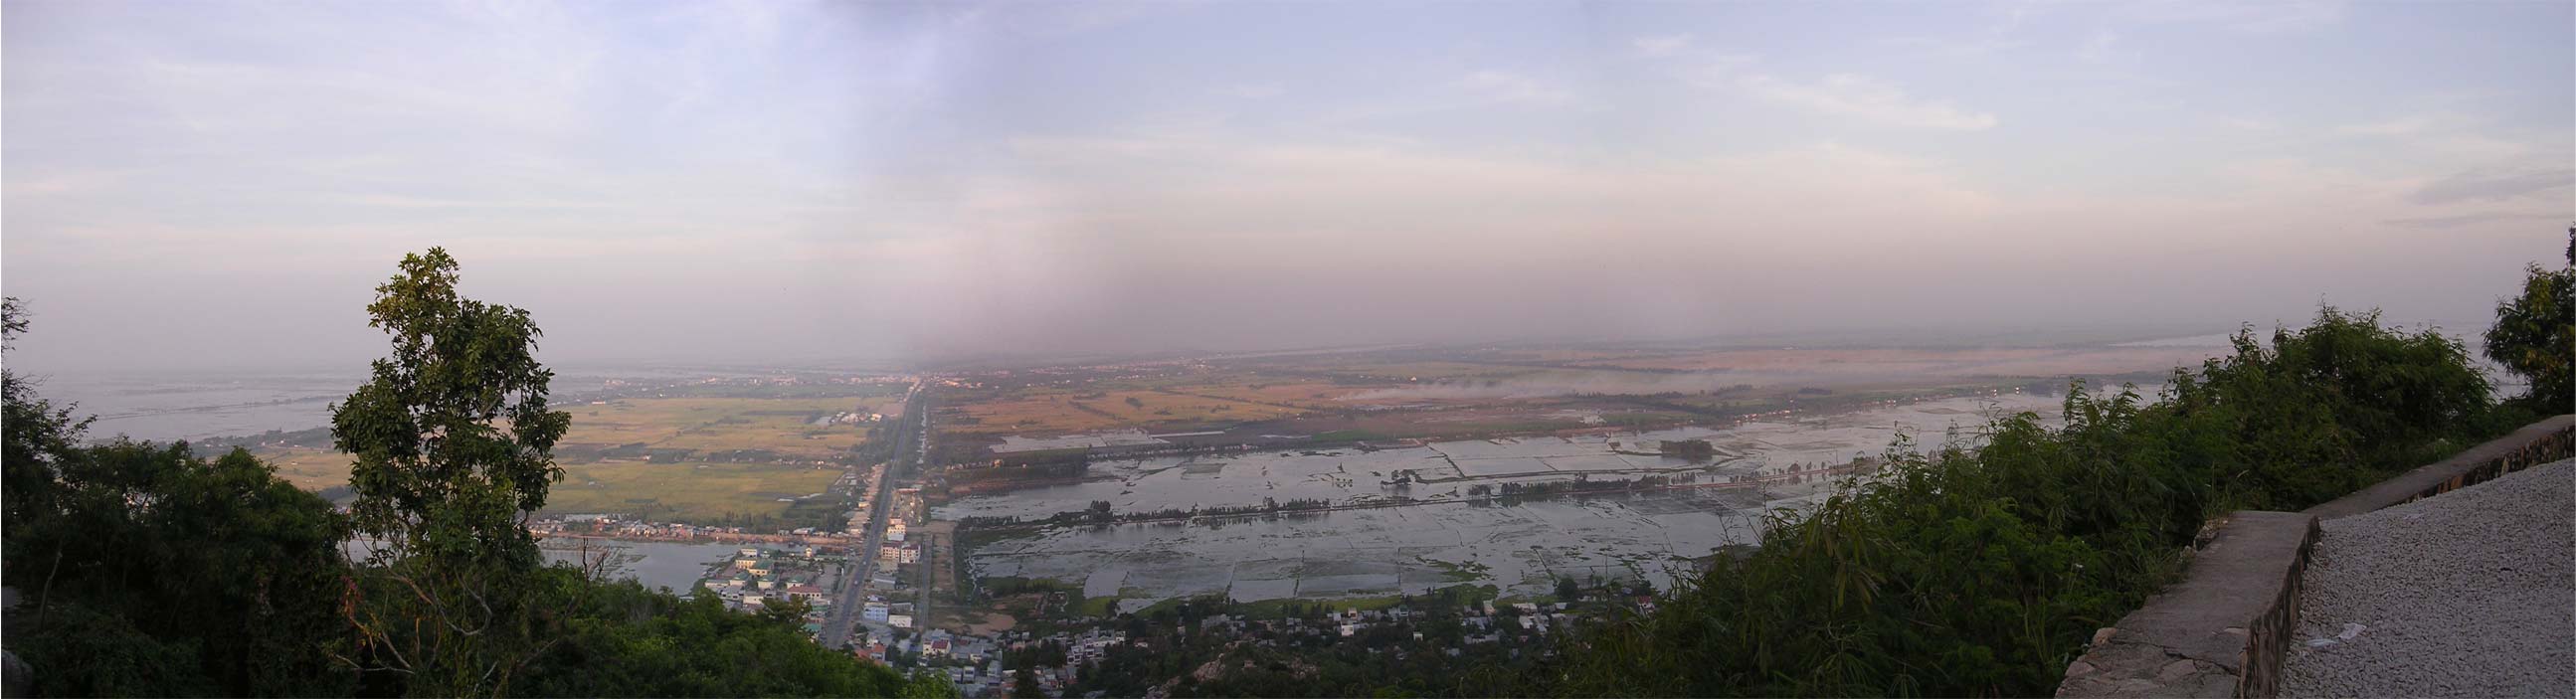 Panorama over the Vietnam side<br />(composite of 3 photographs)